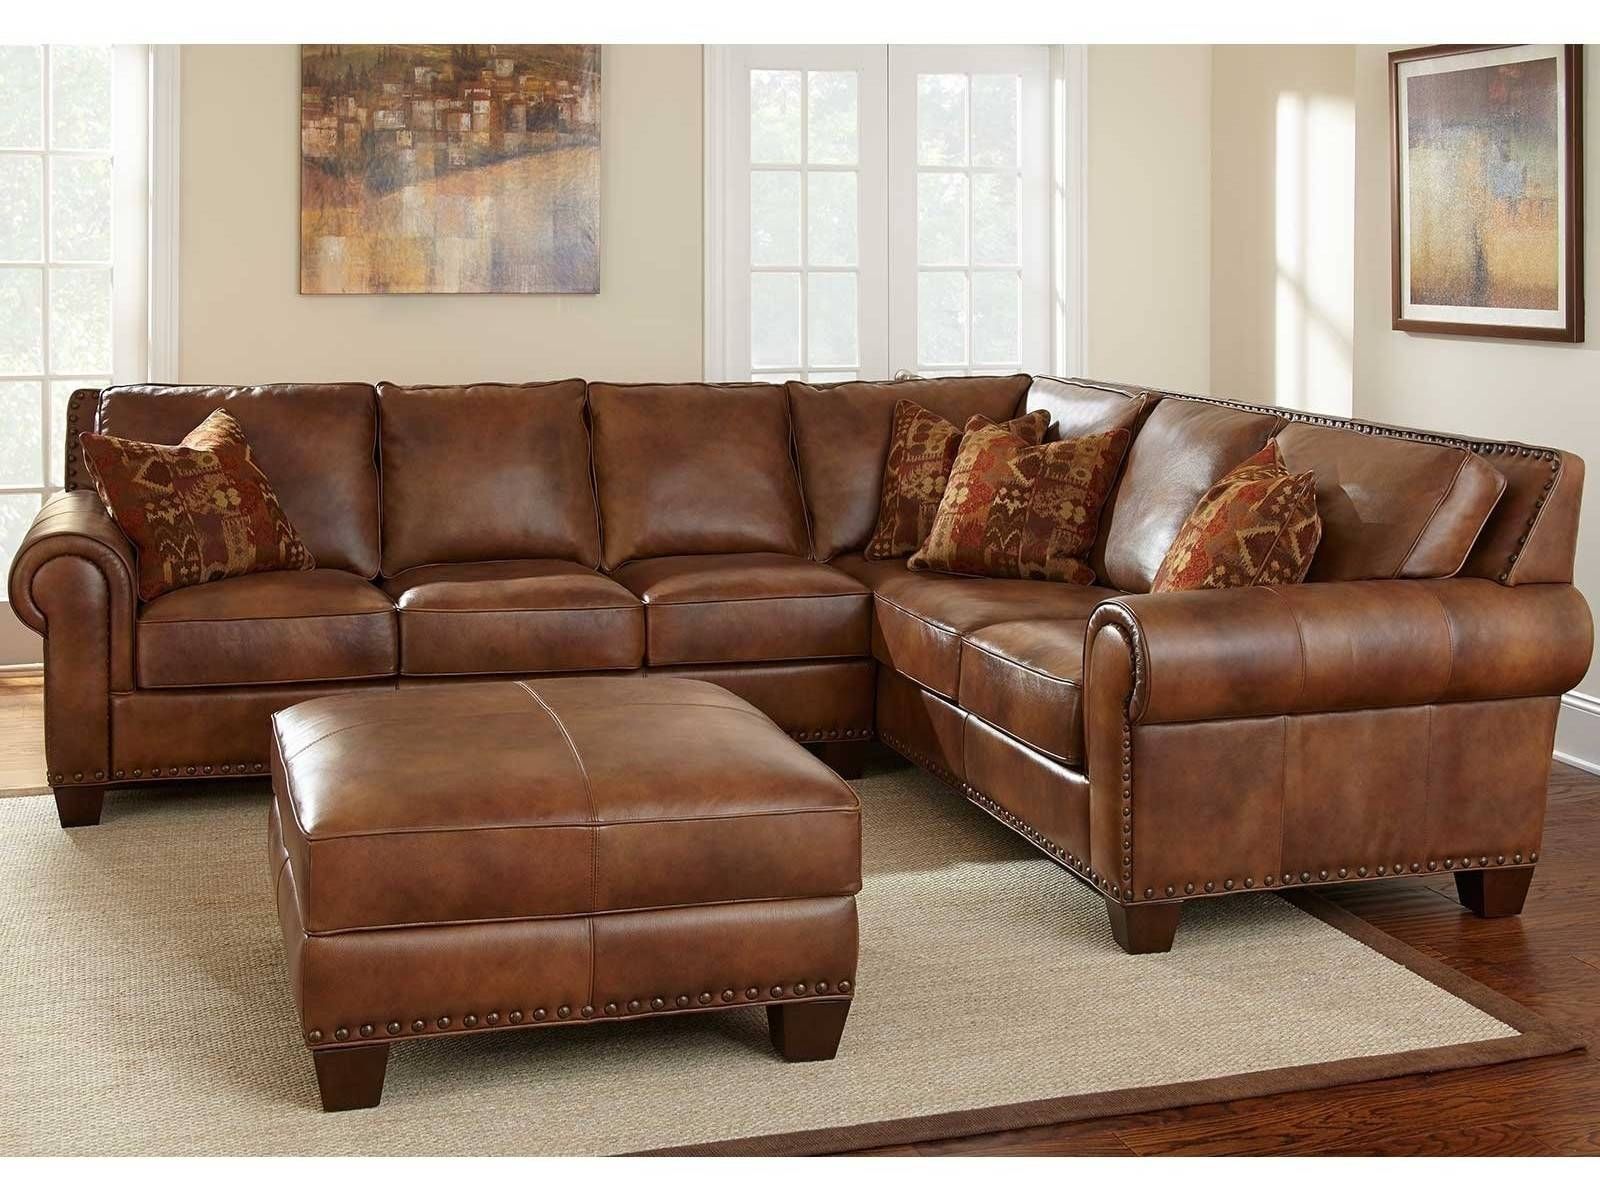 ☆▻ Sofa : 1 Wonderful Leather Sofa Sale Grand Leather Sofa With Regard To Leather Sofa Sectionals For Sale (View 3 of 30)